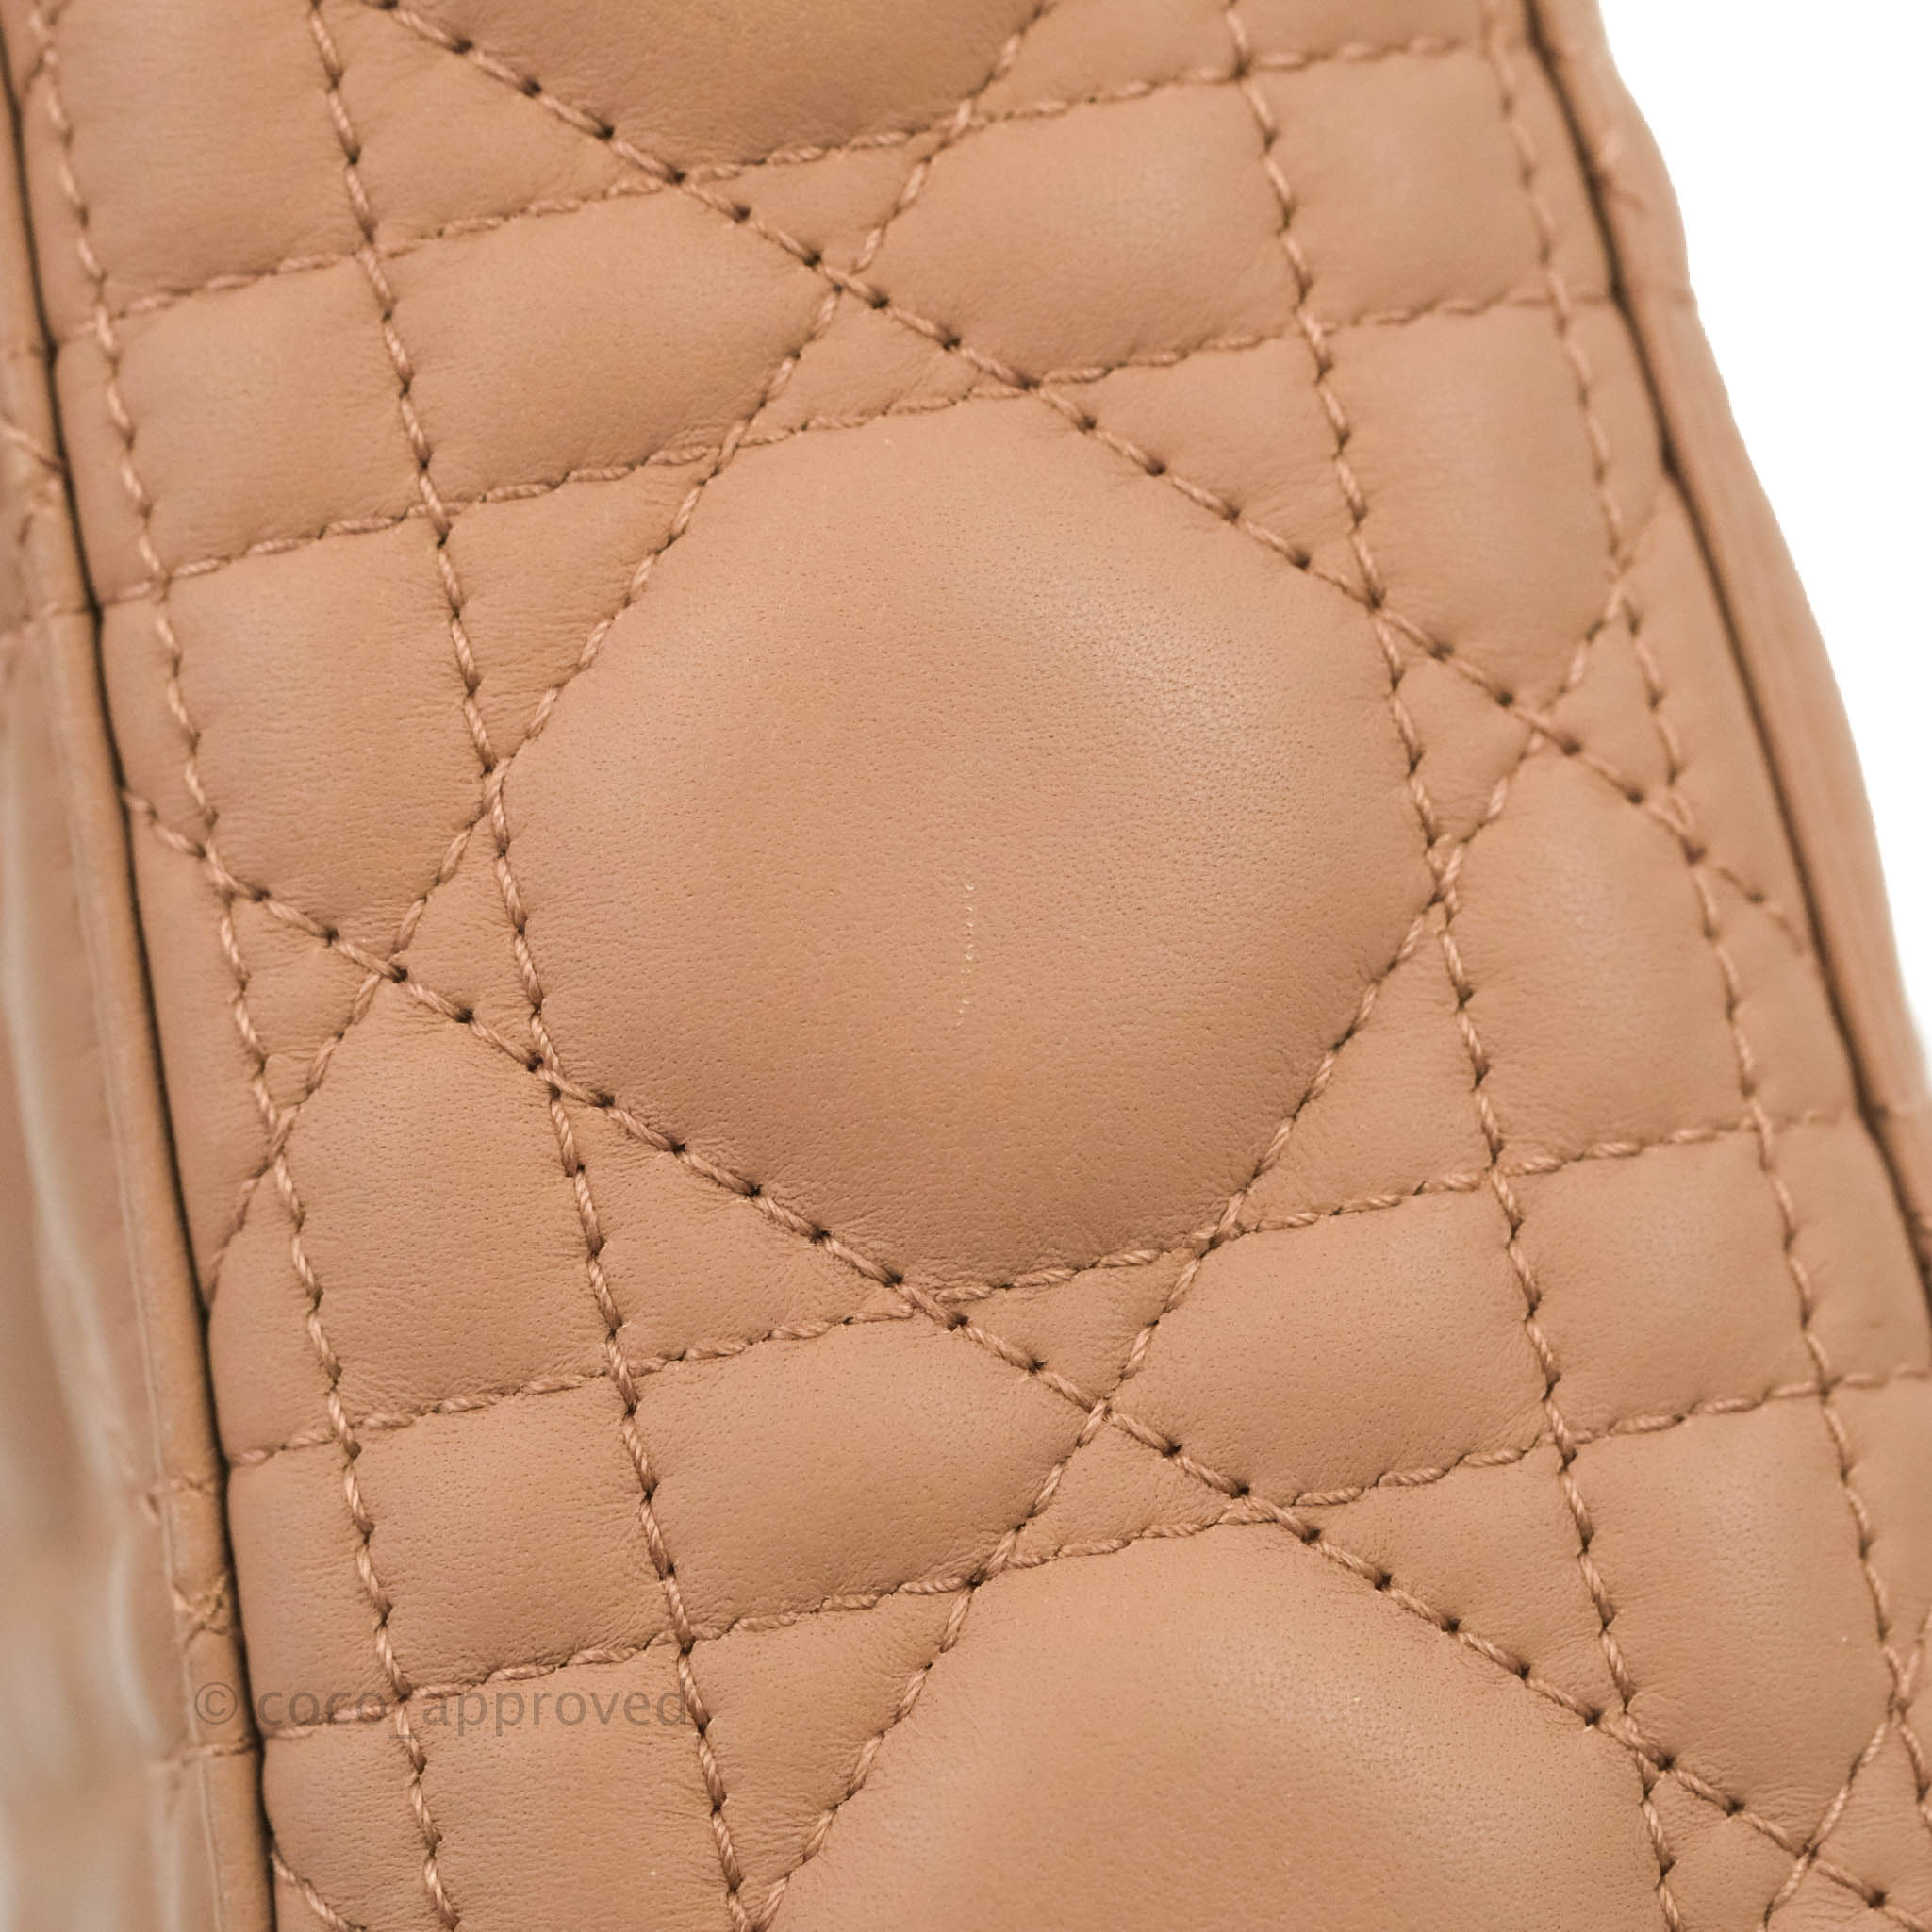 Christian Dior Latte Ultramatte Cannage Calfskin Mini Lady Dior Bag  Available For Immediate Sale At Sotheby's